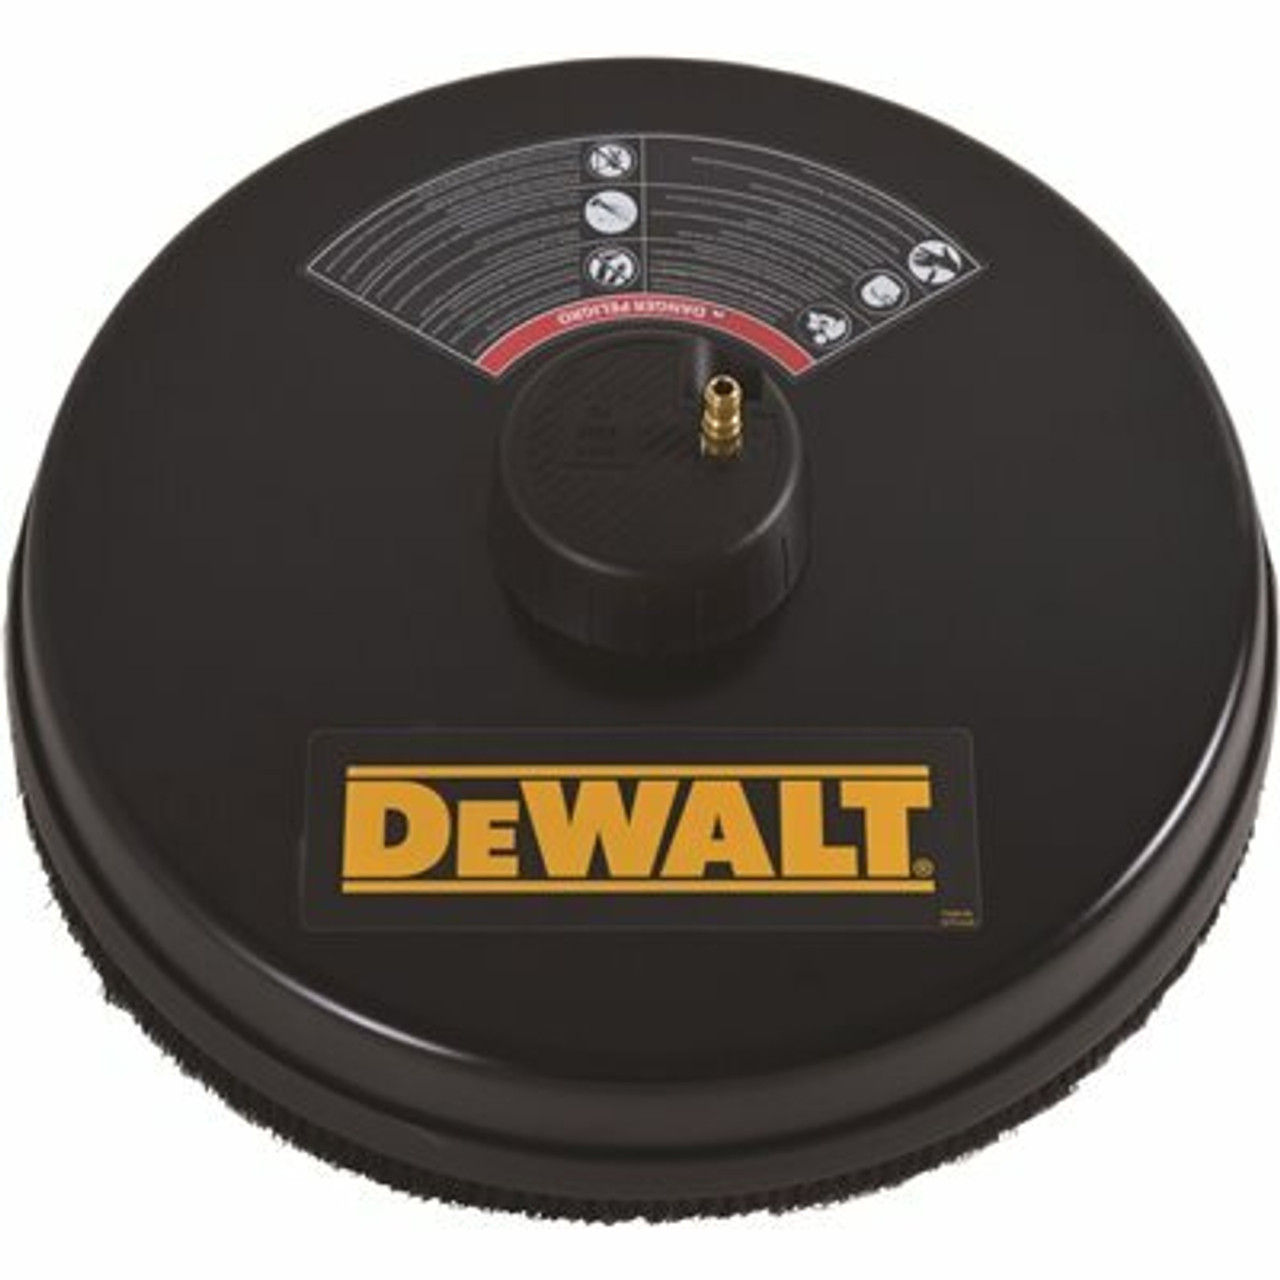 Dewalt 18 In. Surface Cleaner For Gas Pressure Washers Rated Up To 3700 Psi